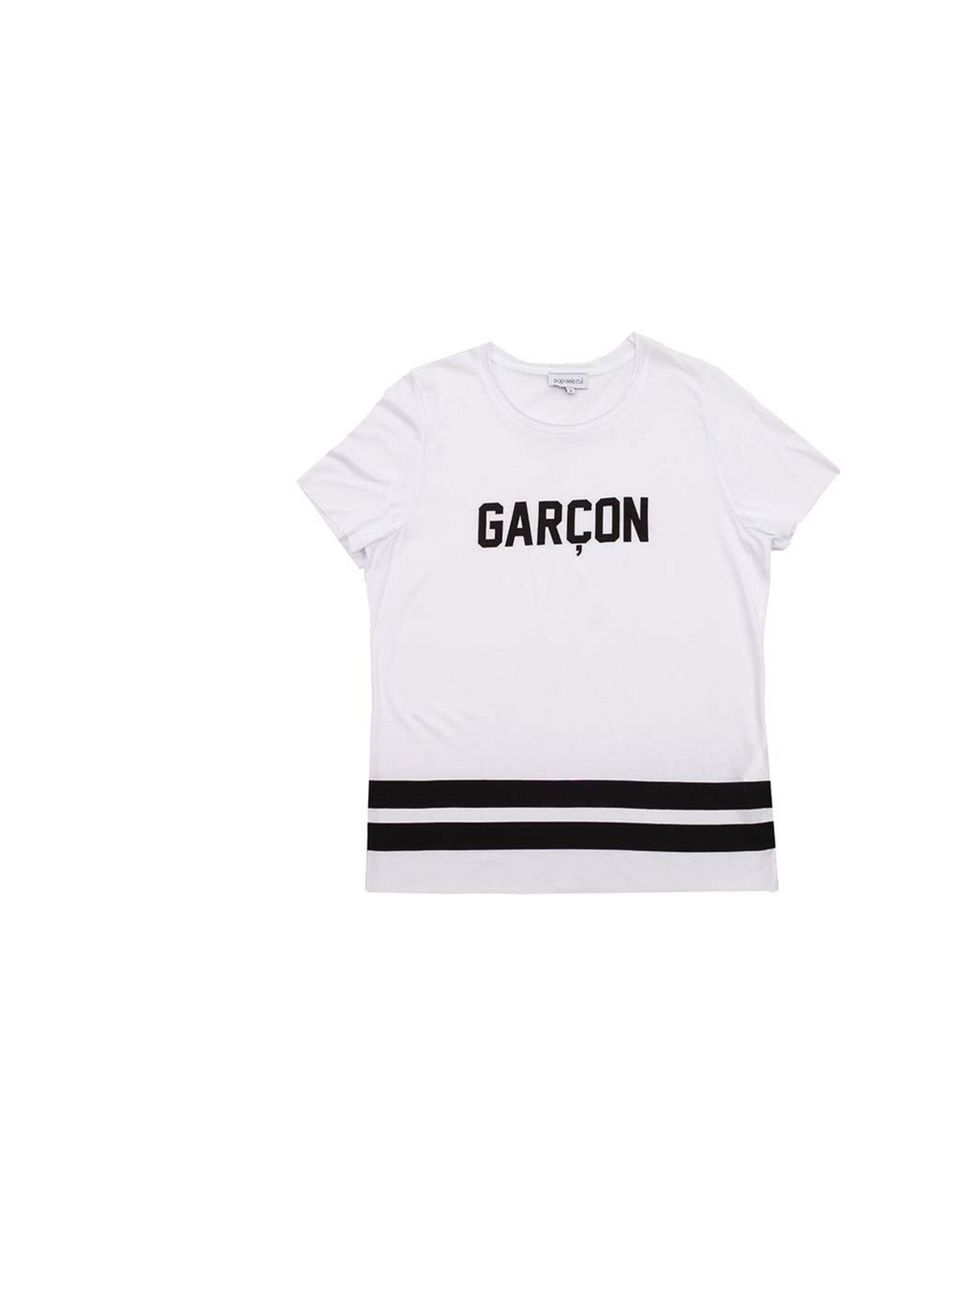 <p>Introducing Pop.see.cul, our new go-to brand for slogan tees and sweatshirts; Fashion Production & Bookings Editor Rosie Bendandi has her eye on this monochrome number.</p><p><a href="http://popseecul.com/product/garcon/">Pop.see.cul</a> t-shirt, £50</